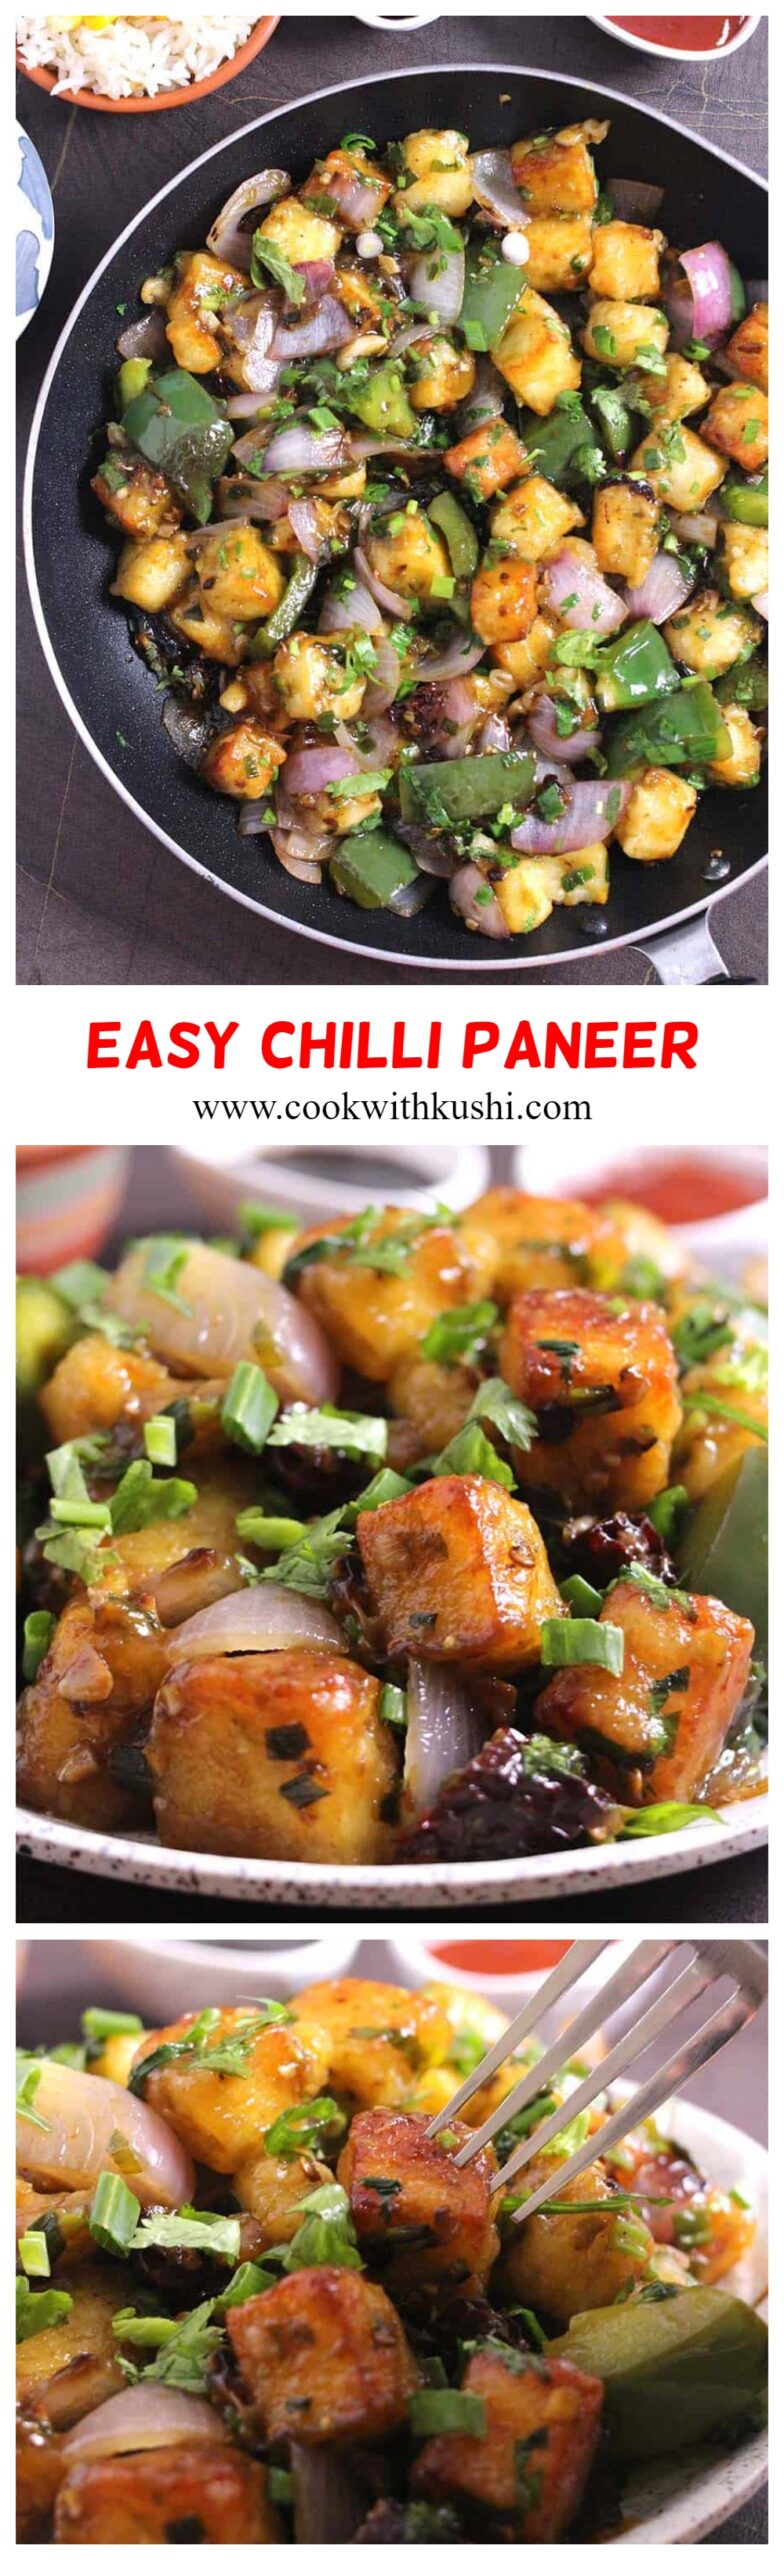 How to make paneer chilli dry recipe restaurant style at home #Paneer #starter #appetizer